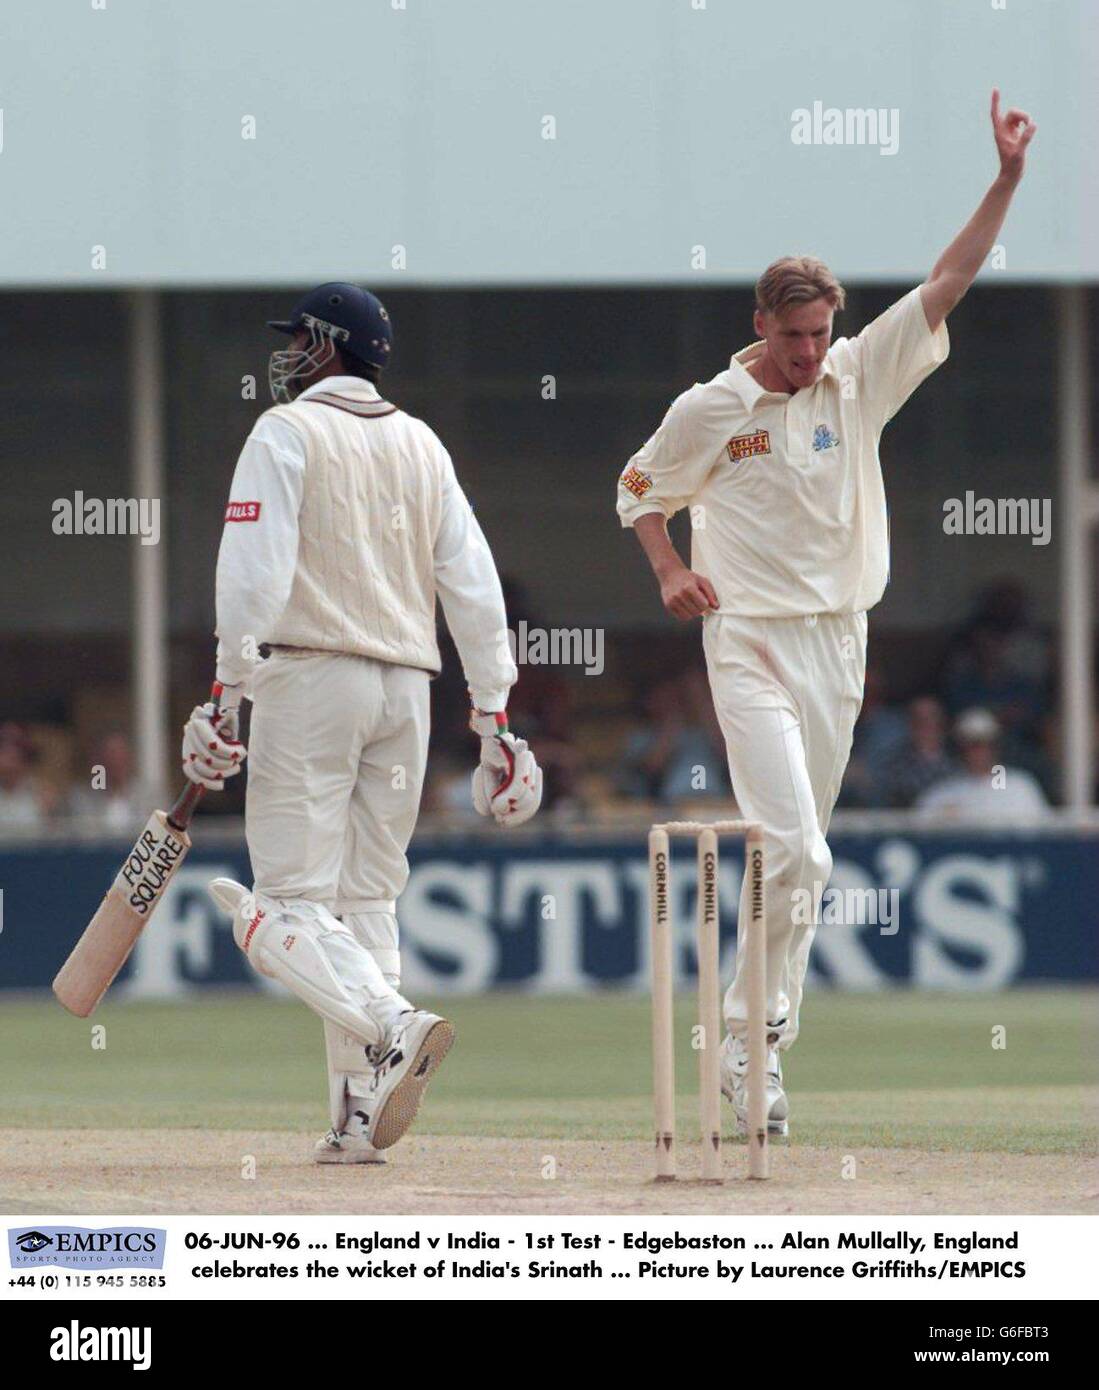 06-JUN-96, England v India - 1st Test - Edgebaston, Alan Mullally, England celebrates the wicket of India's Srinath, Picture by Laurence Griffiths/EMPICS Stock Photo